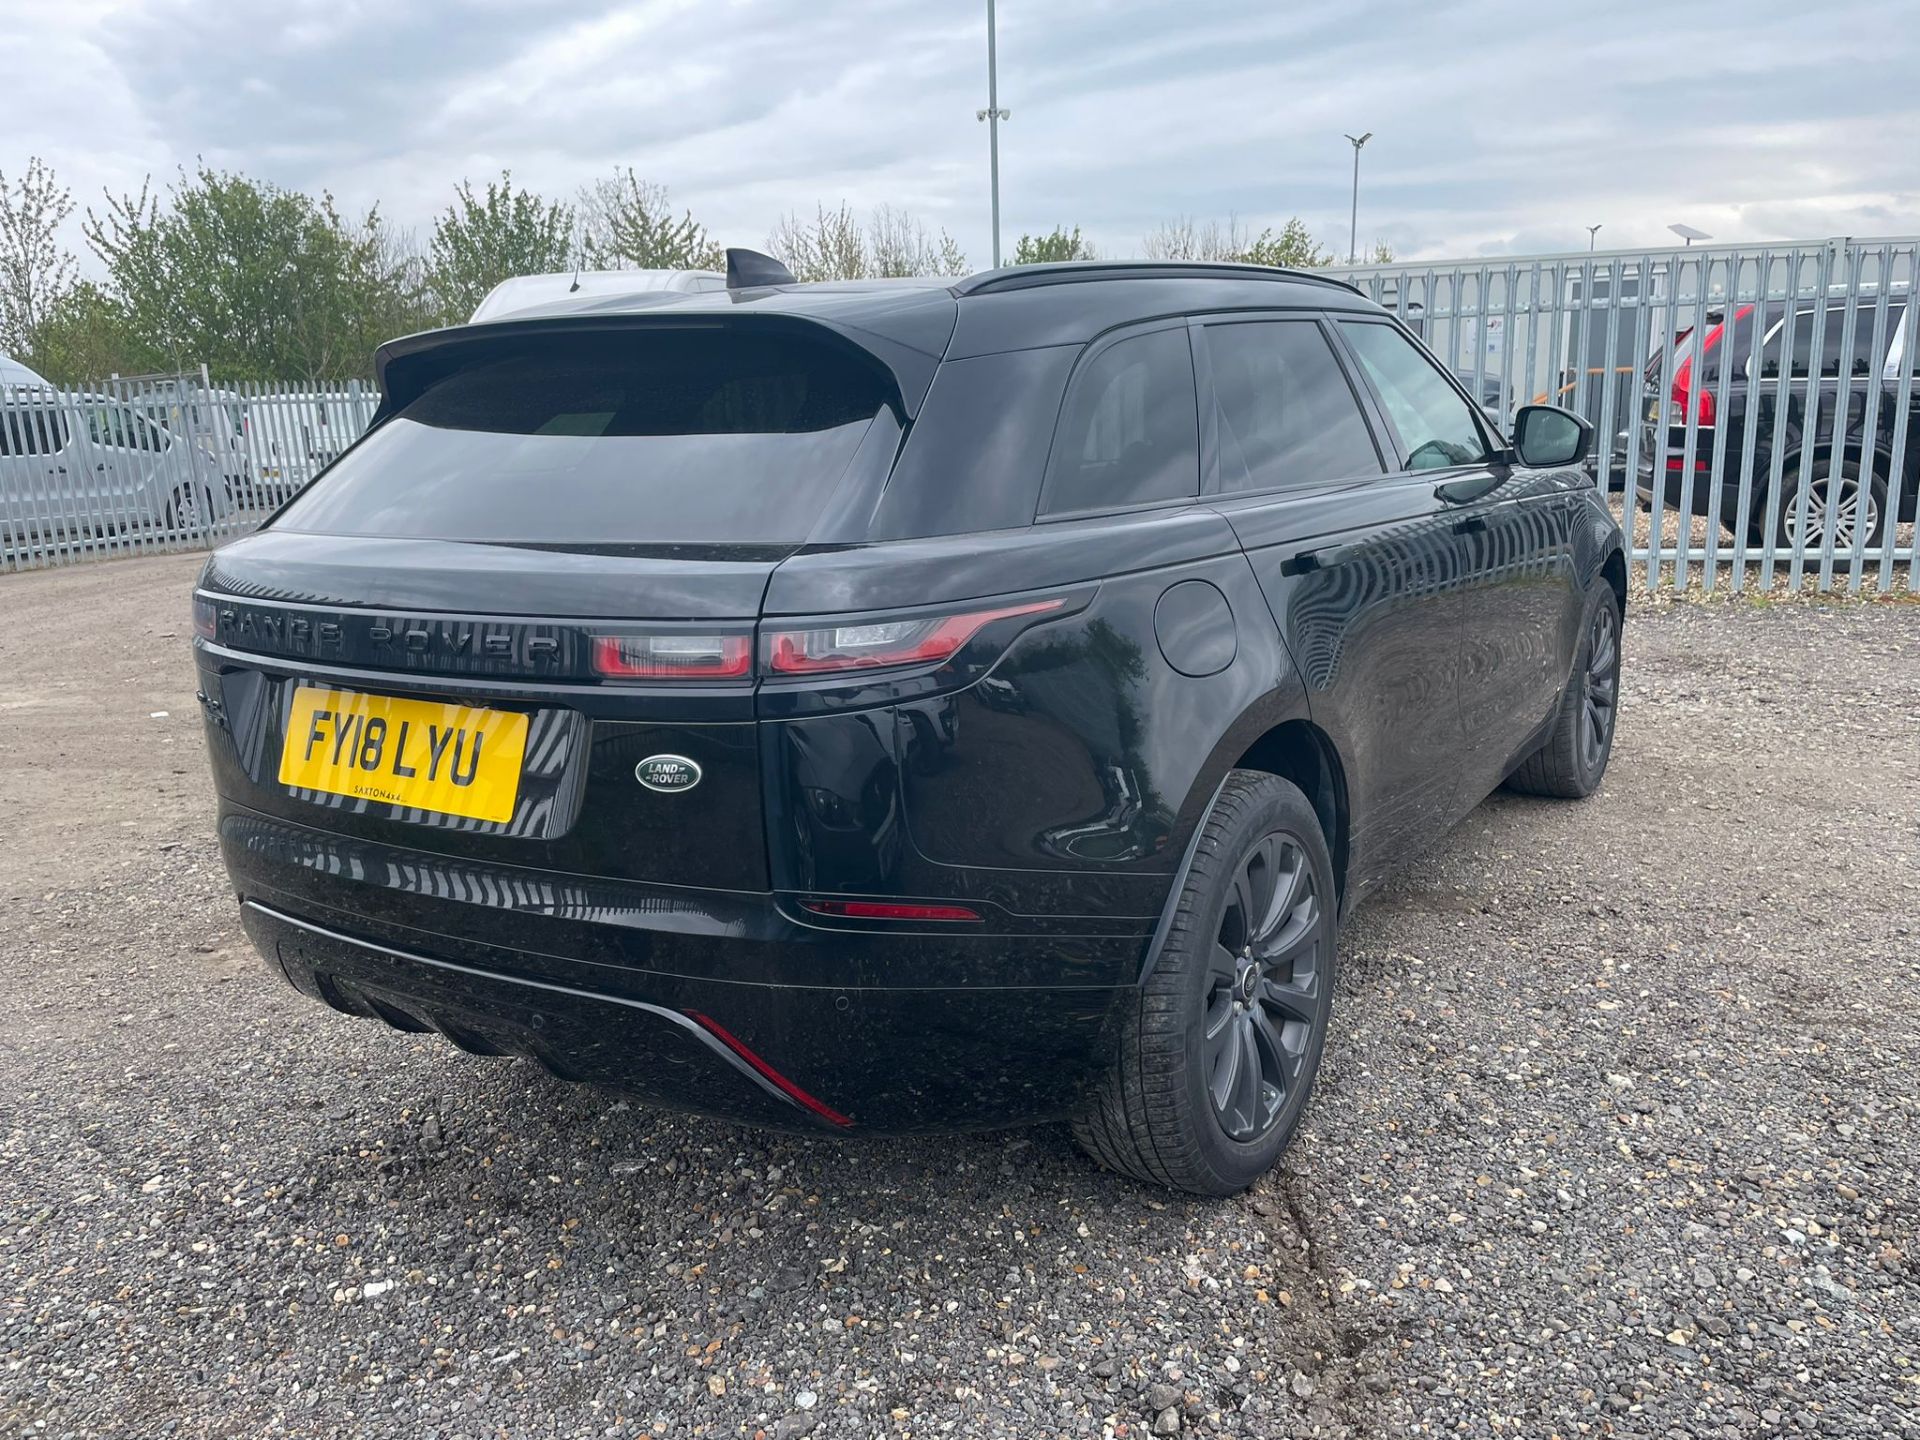 Land Rover Range Rover Velar 2.0 D240 R-Dynamic S 2018 '18 Reg' 4WD - Panoramic Roof- ULEZ Compliant - Image 9 of 33